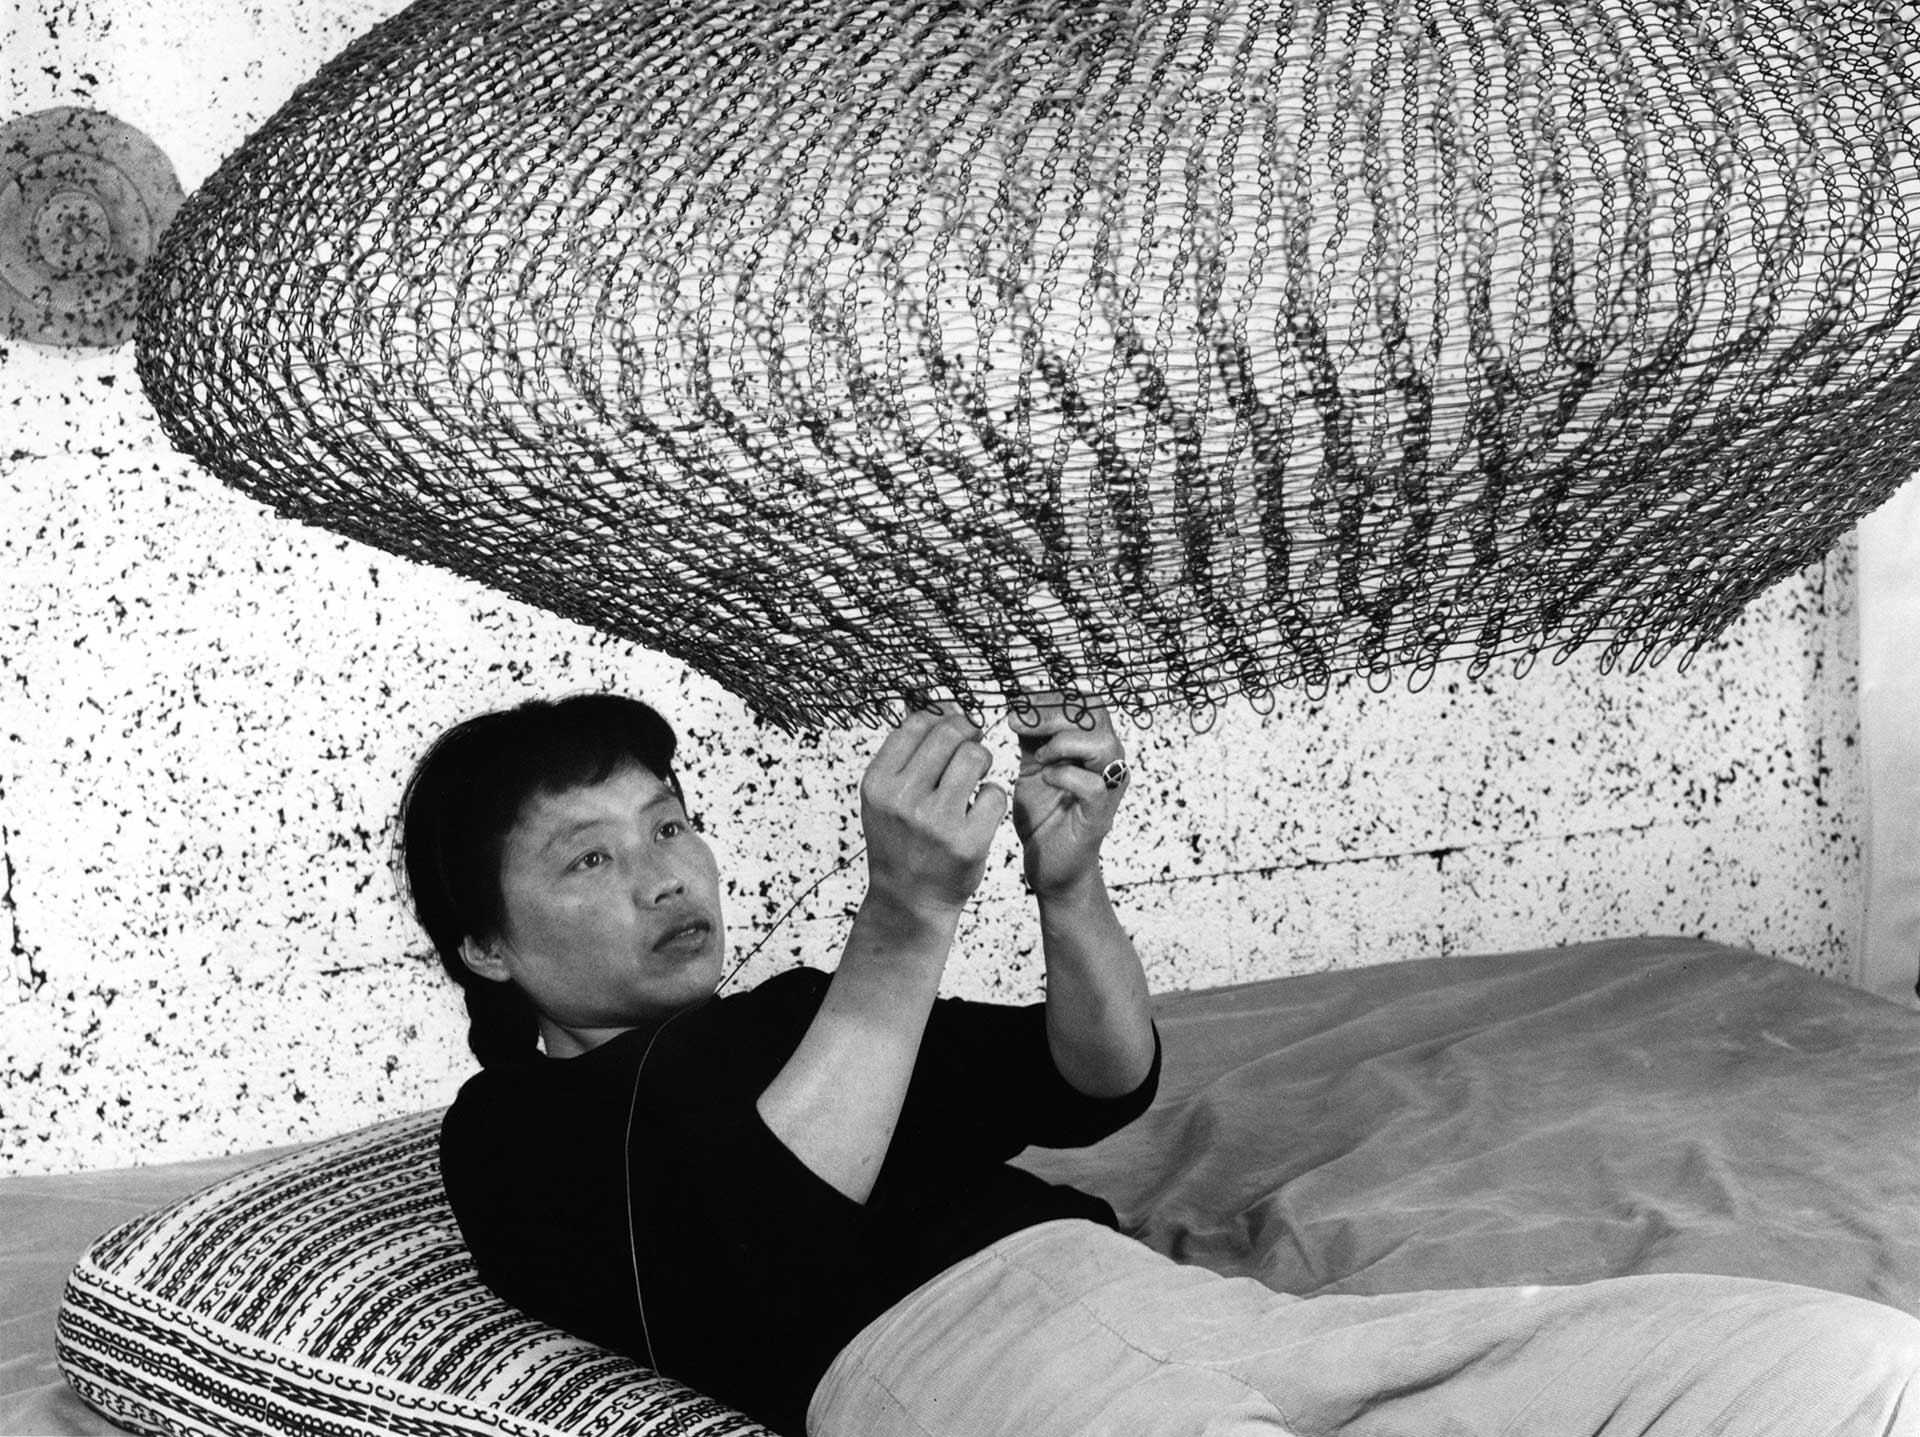 A photograph of Ruth Asawa by Imogen Cunningham, dated 1957.